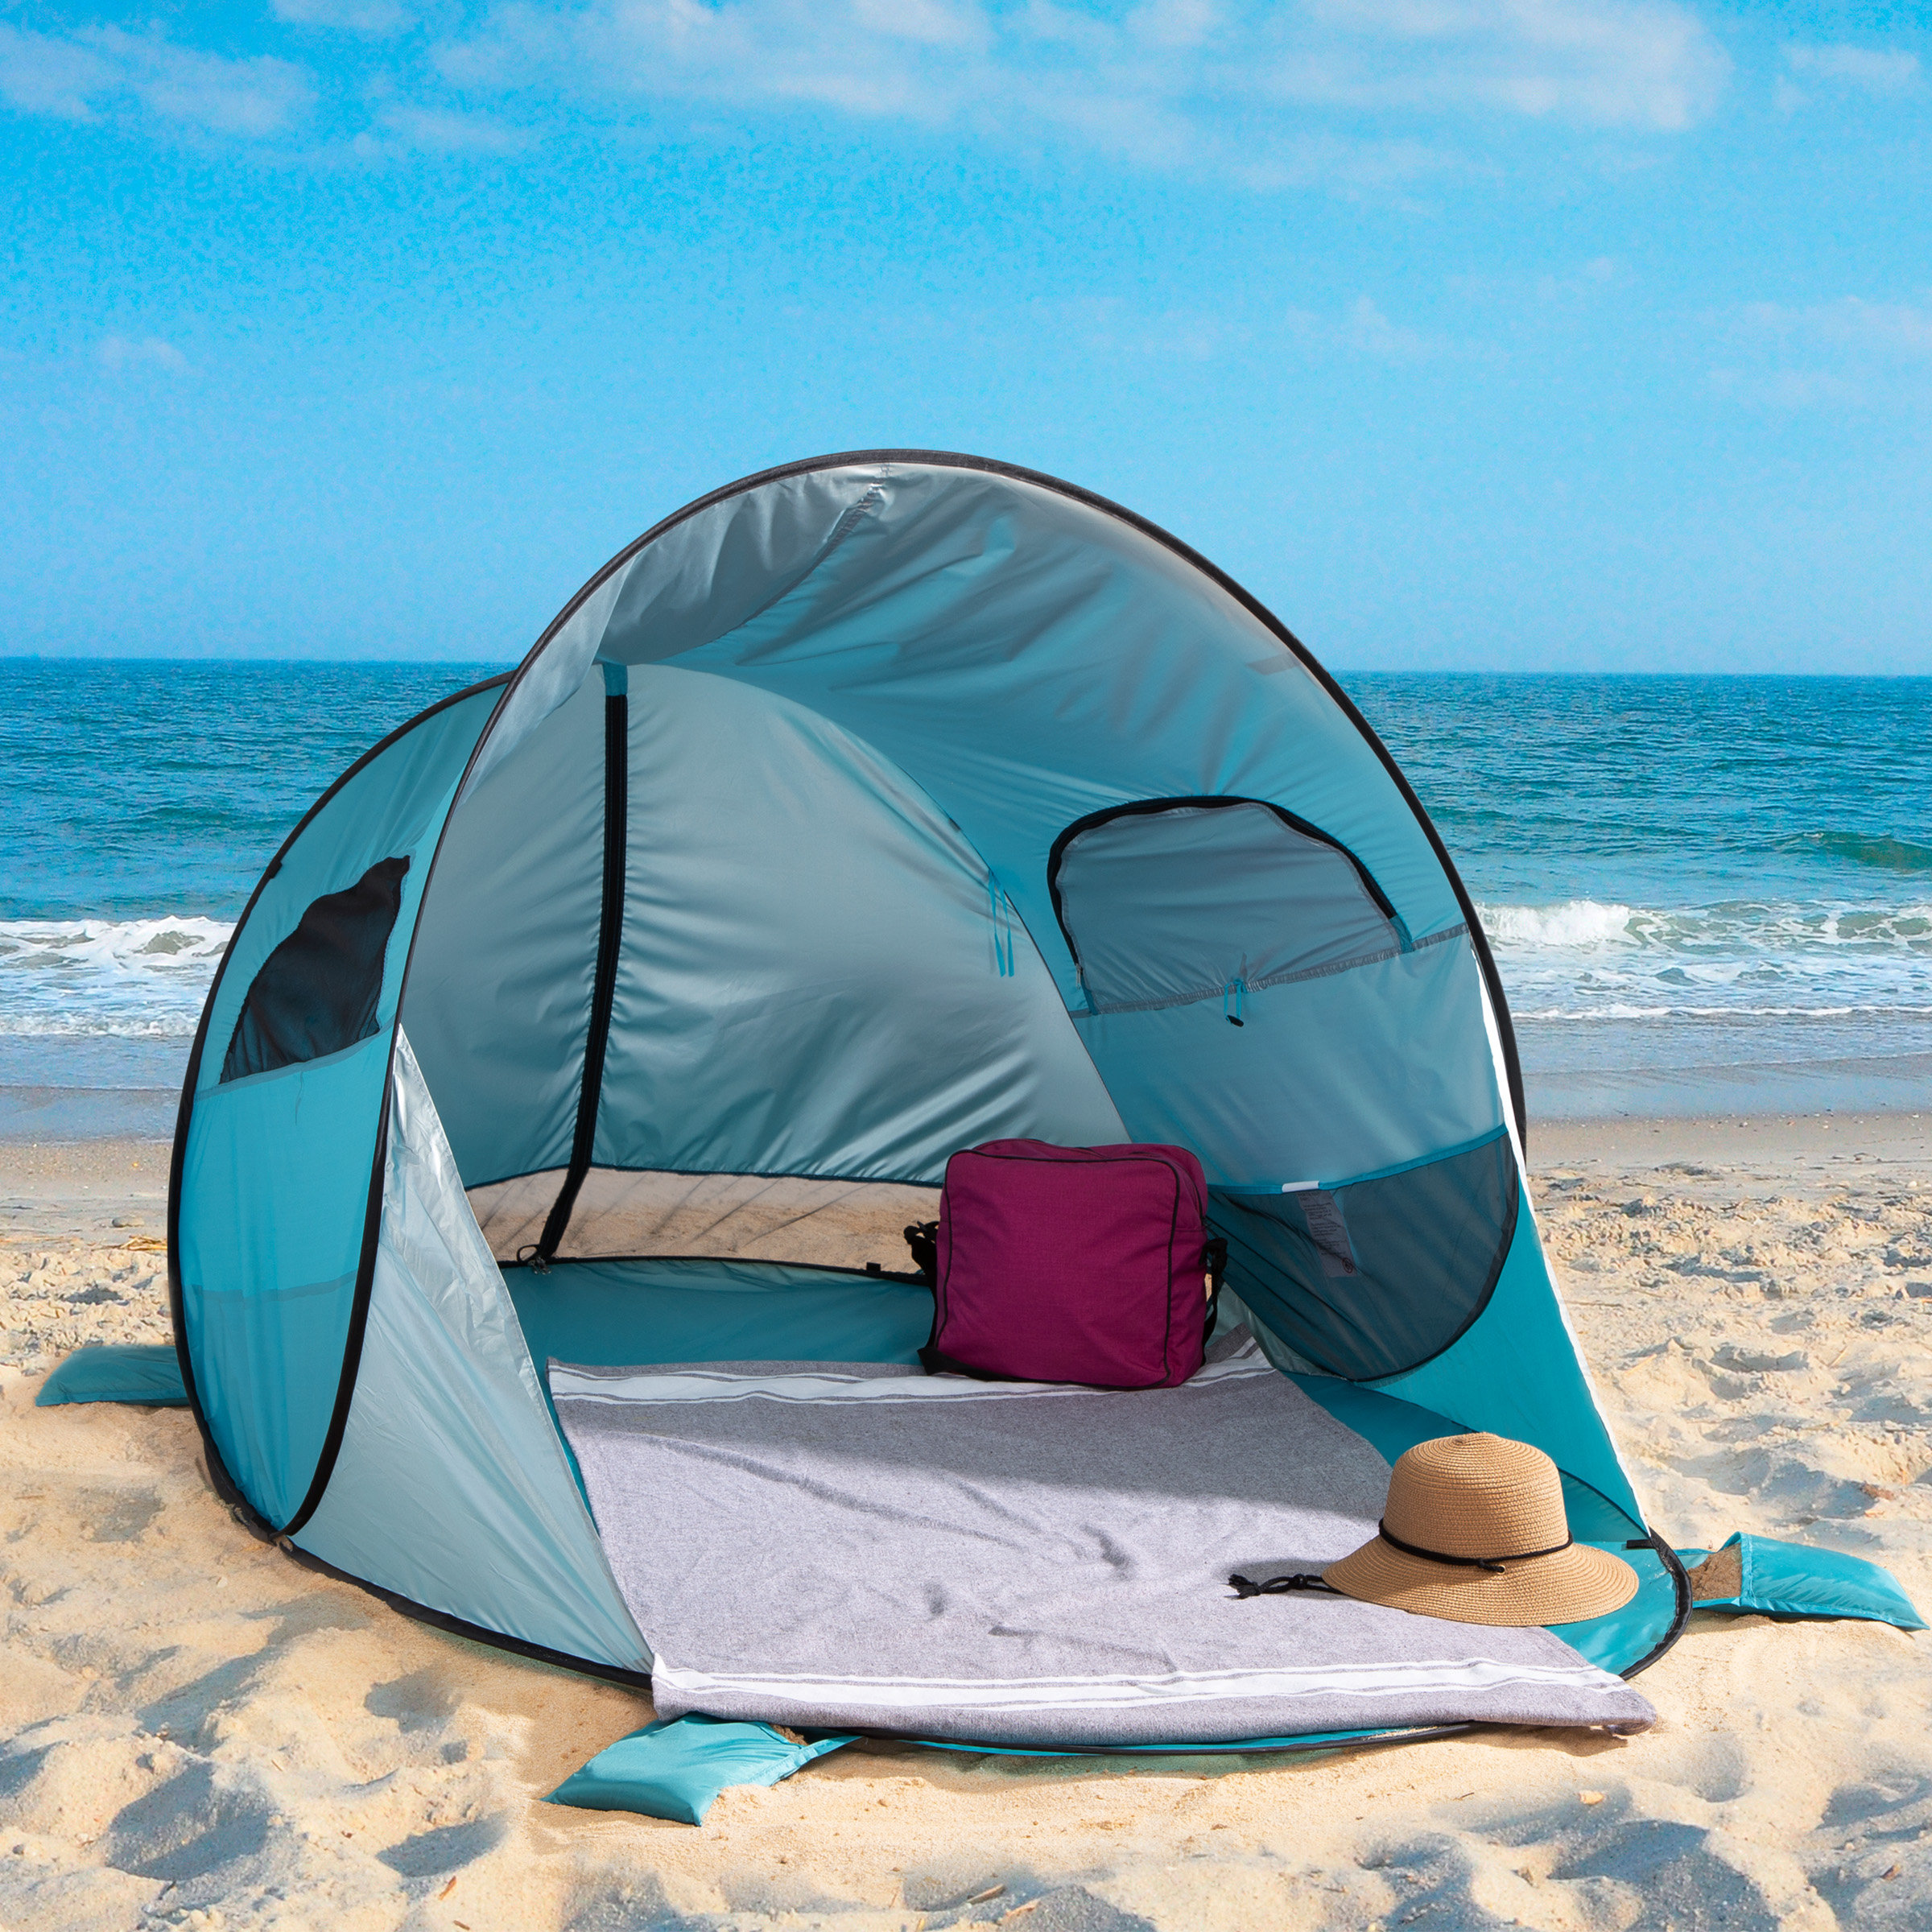 Wakeman Pop Up Beach Tent - Sun Shelter with UV Protection and Ventilation  - Camping Canopy & Reviews